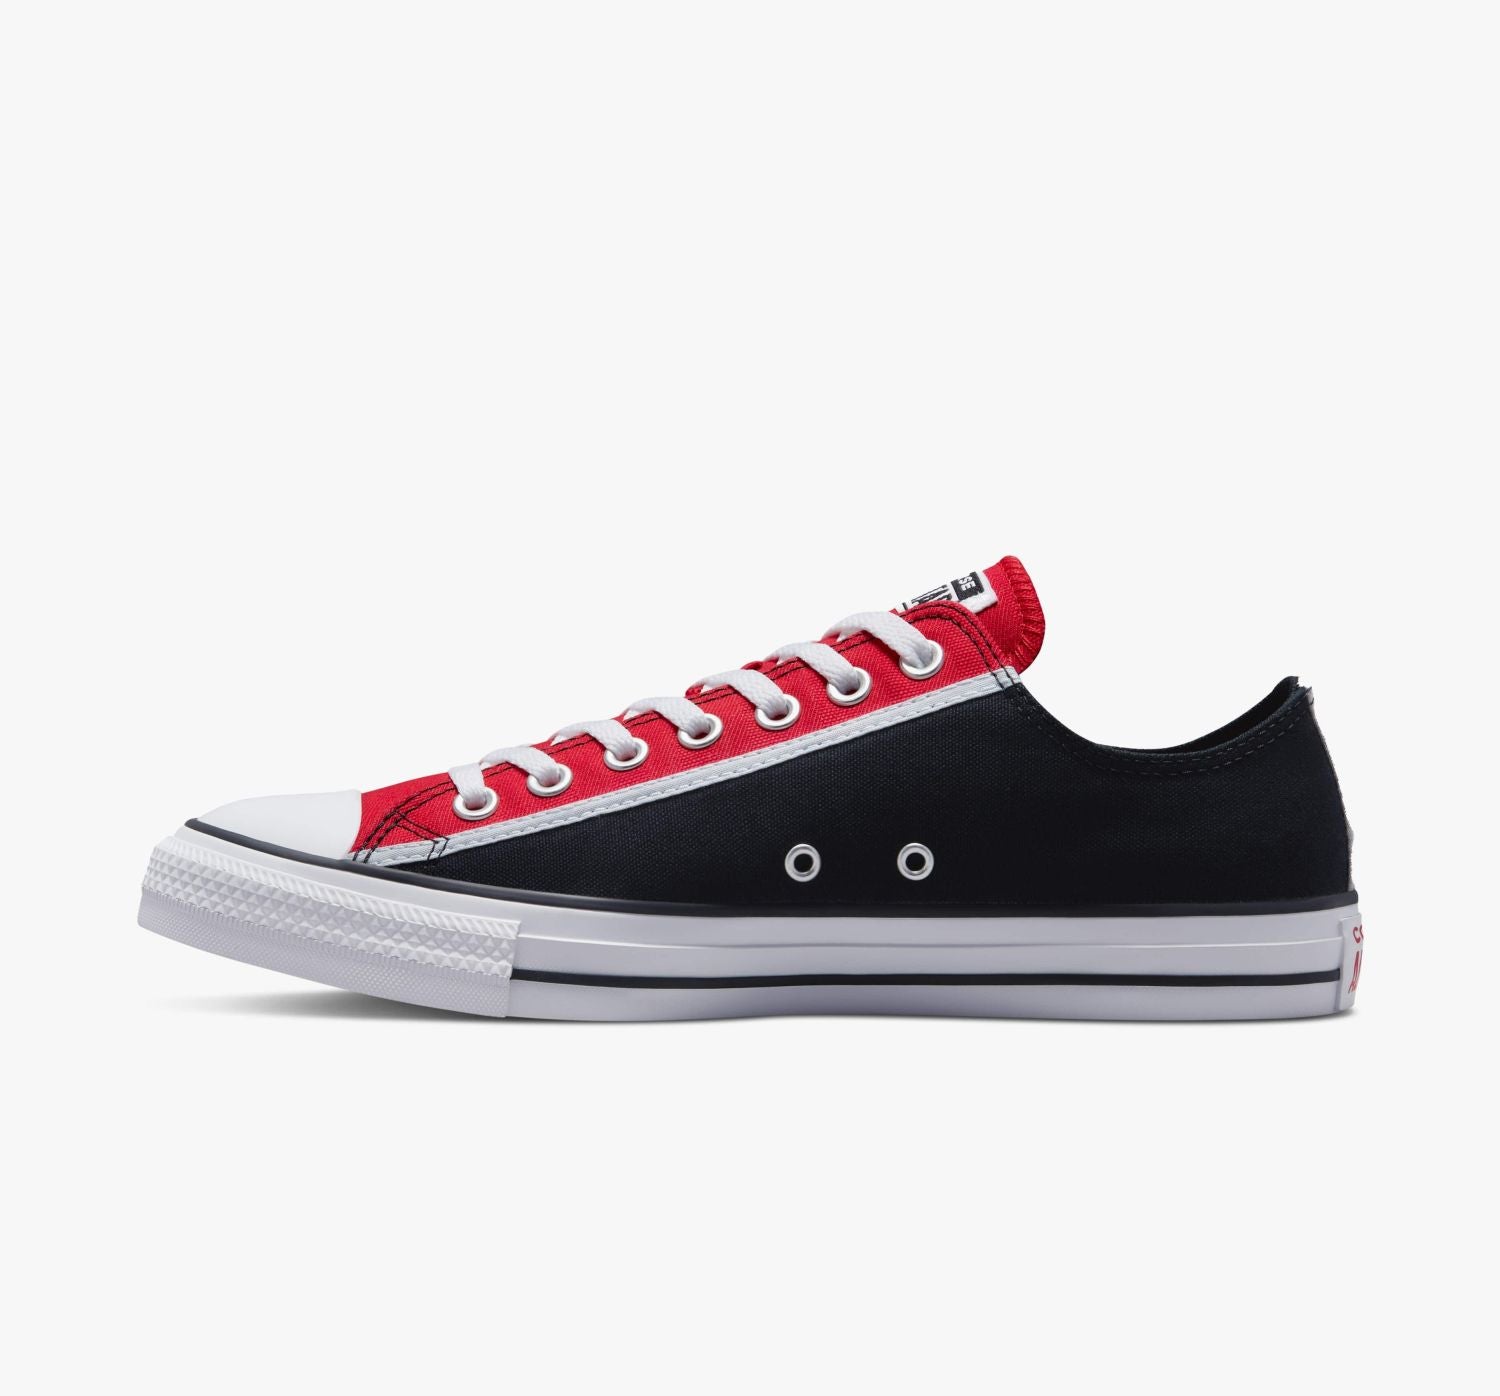 CT-Y36 (Converse retro sport block low black/red/ghosted) 52395650 CONVERSE